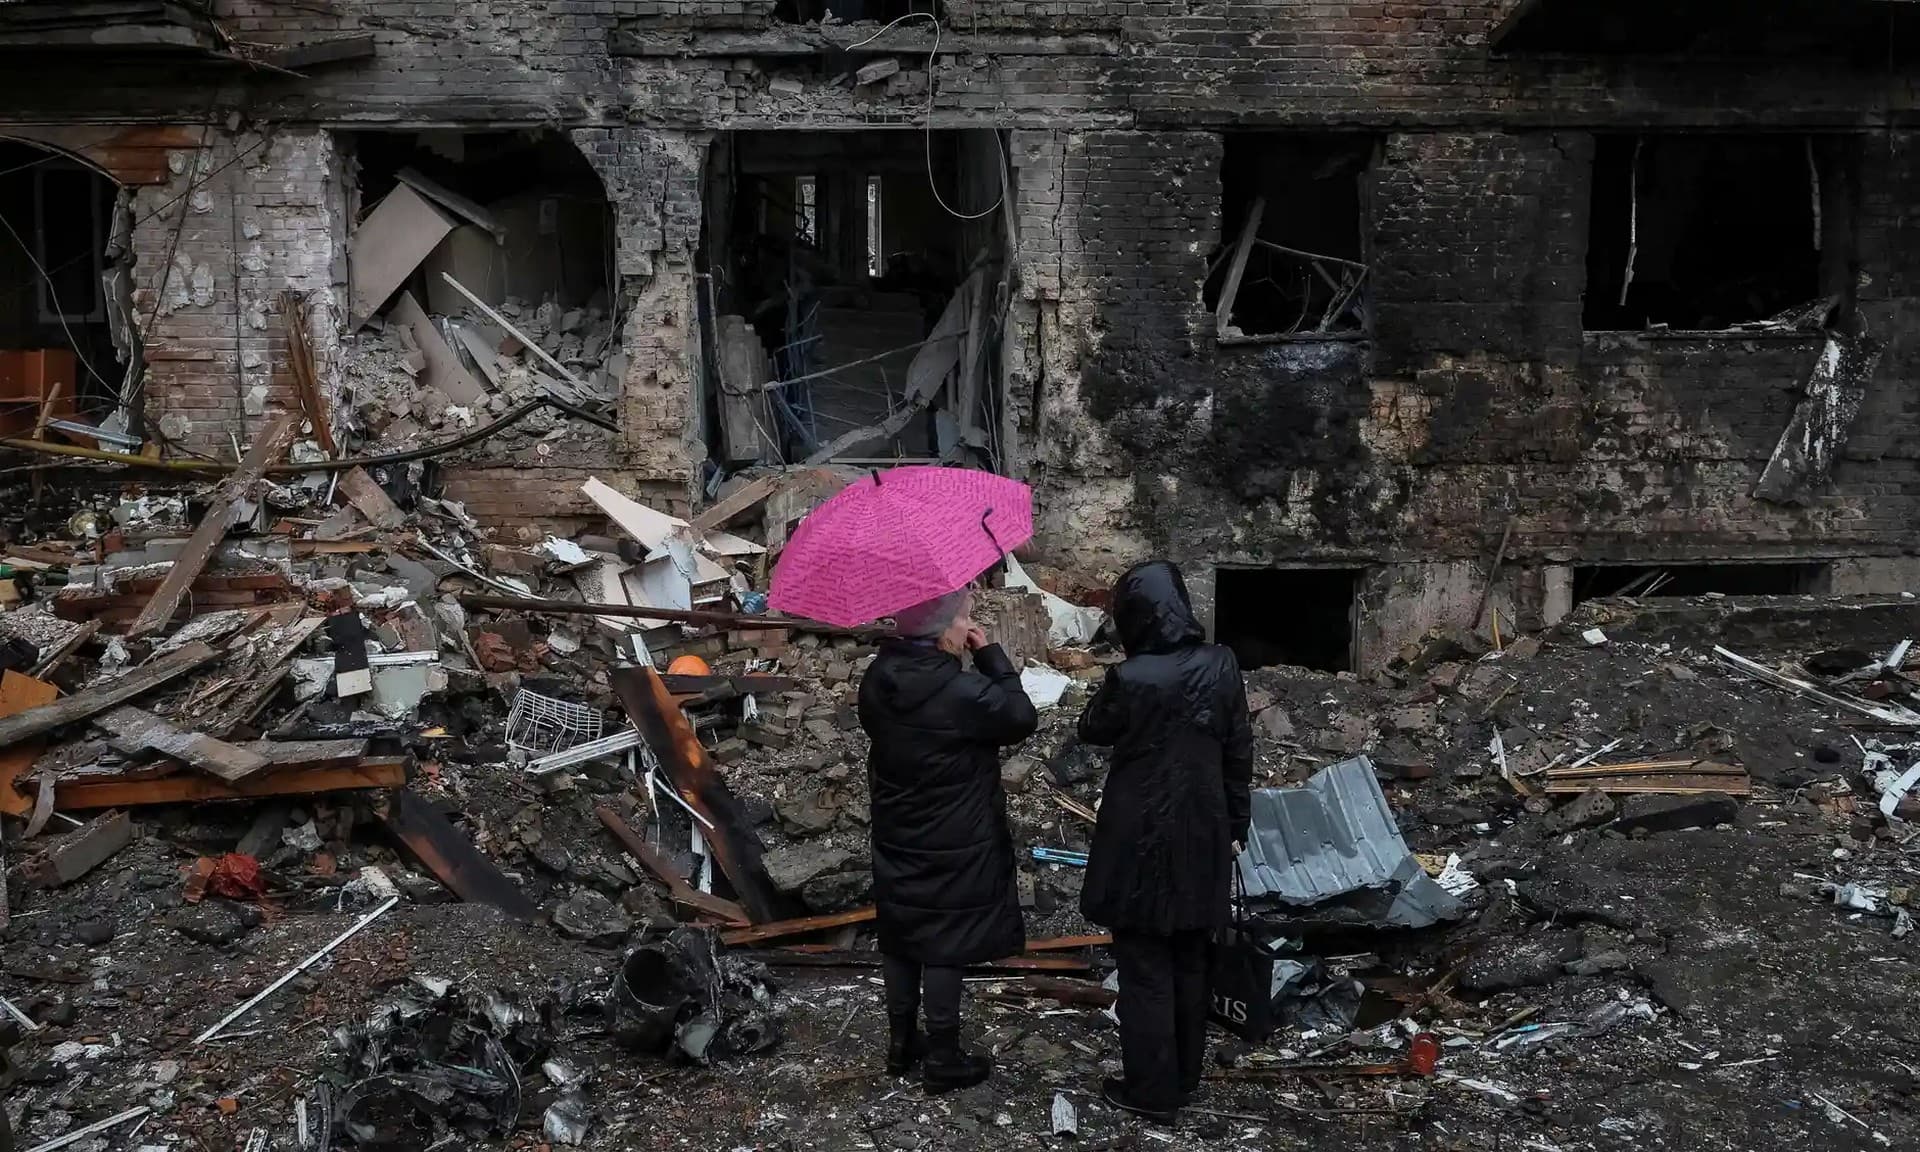 Residents look over the remains of their building, which was destroyed by a Russian missile on Wednesday, in the Kyiv suburb of Vyshhorod.